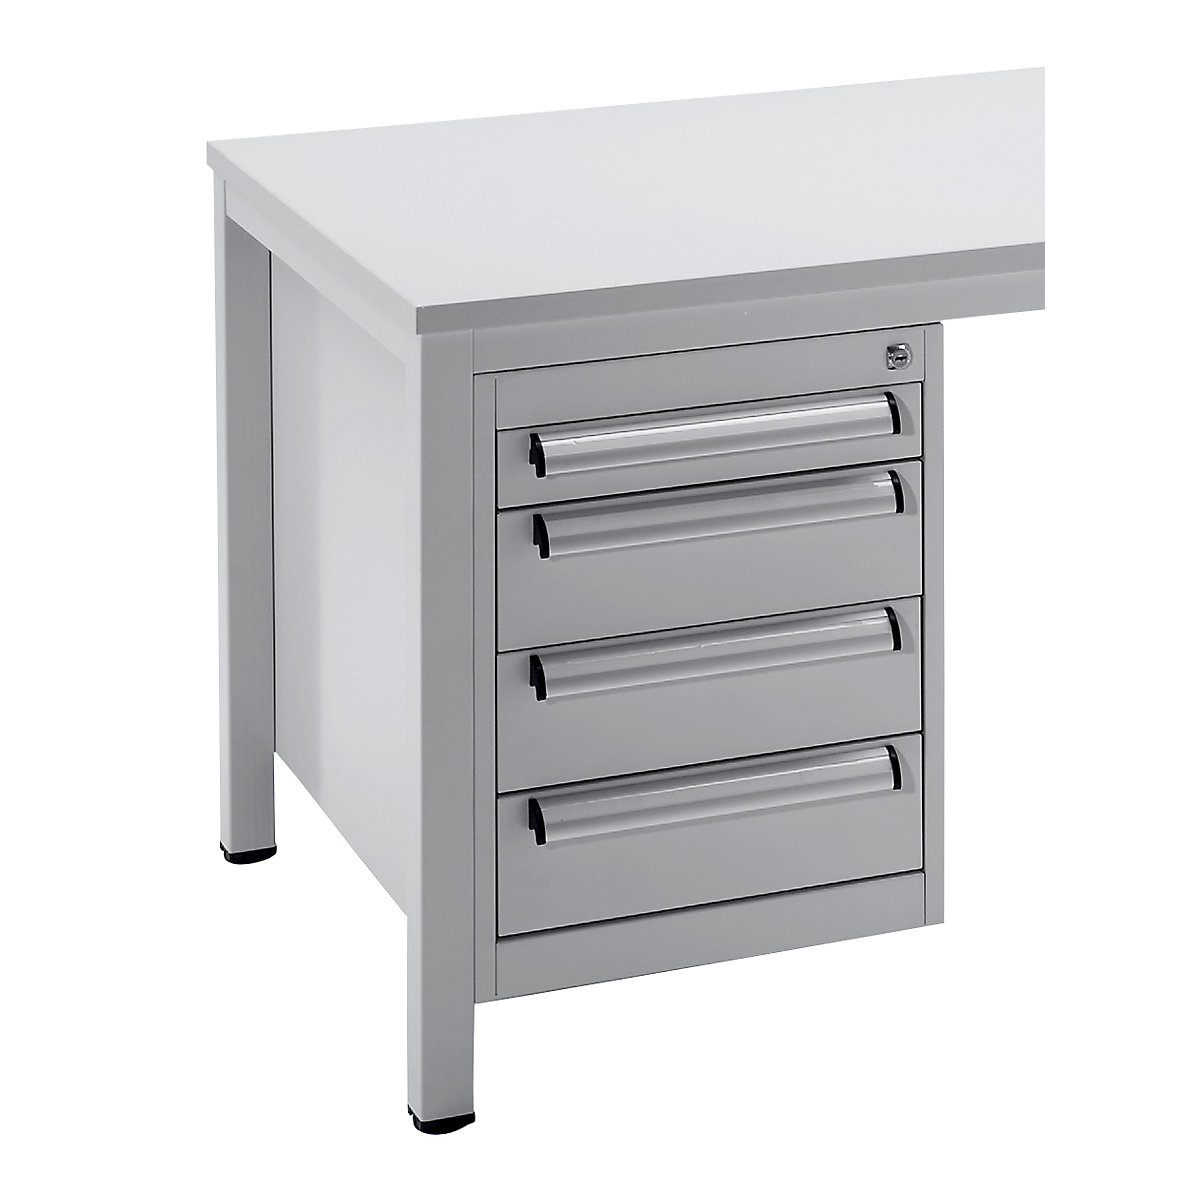 Base drawer unit – eurokraft pro, for foreman's desk, with 4 drawers, 1 x 70 / 1 x 80 / 2 x 150 mm high-3